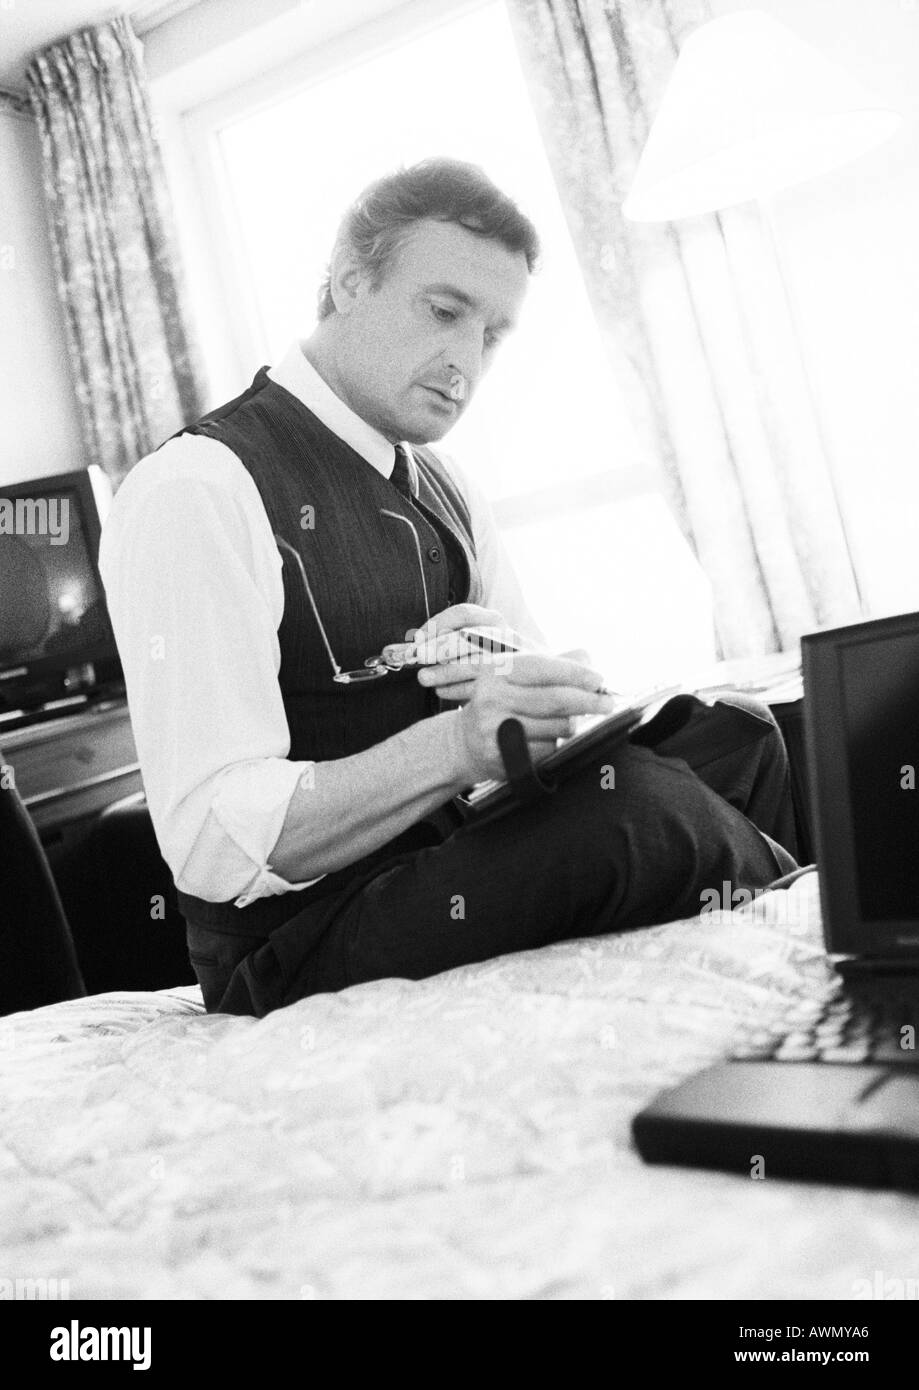 Businessman working, sitting on edge of bed in hotel room, blurred, b&w. Stock Photo